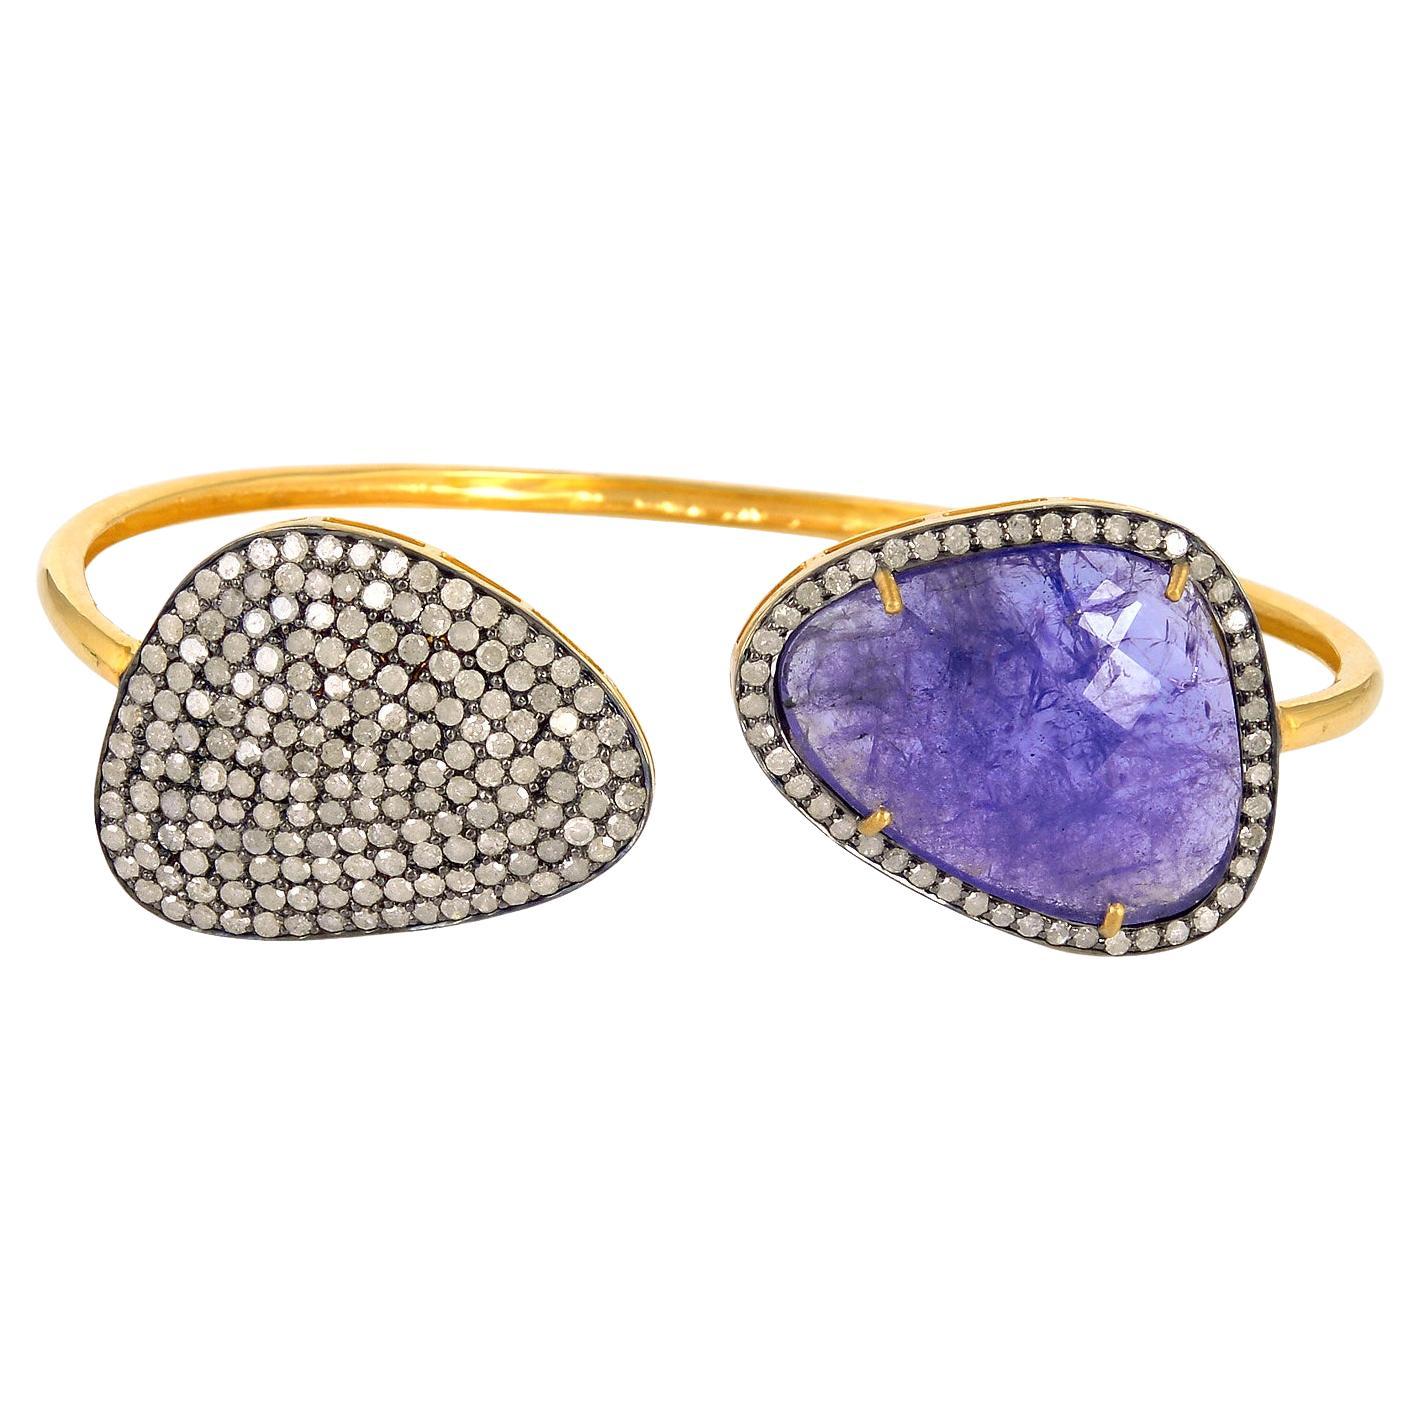 Tanzanite & Pave Diamond Adjustable Bangle Made In 18k Gold & Silver For Sale